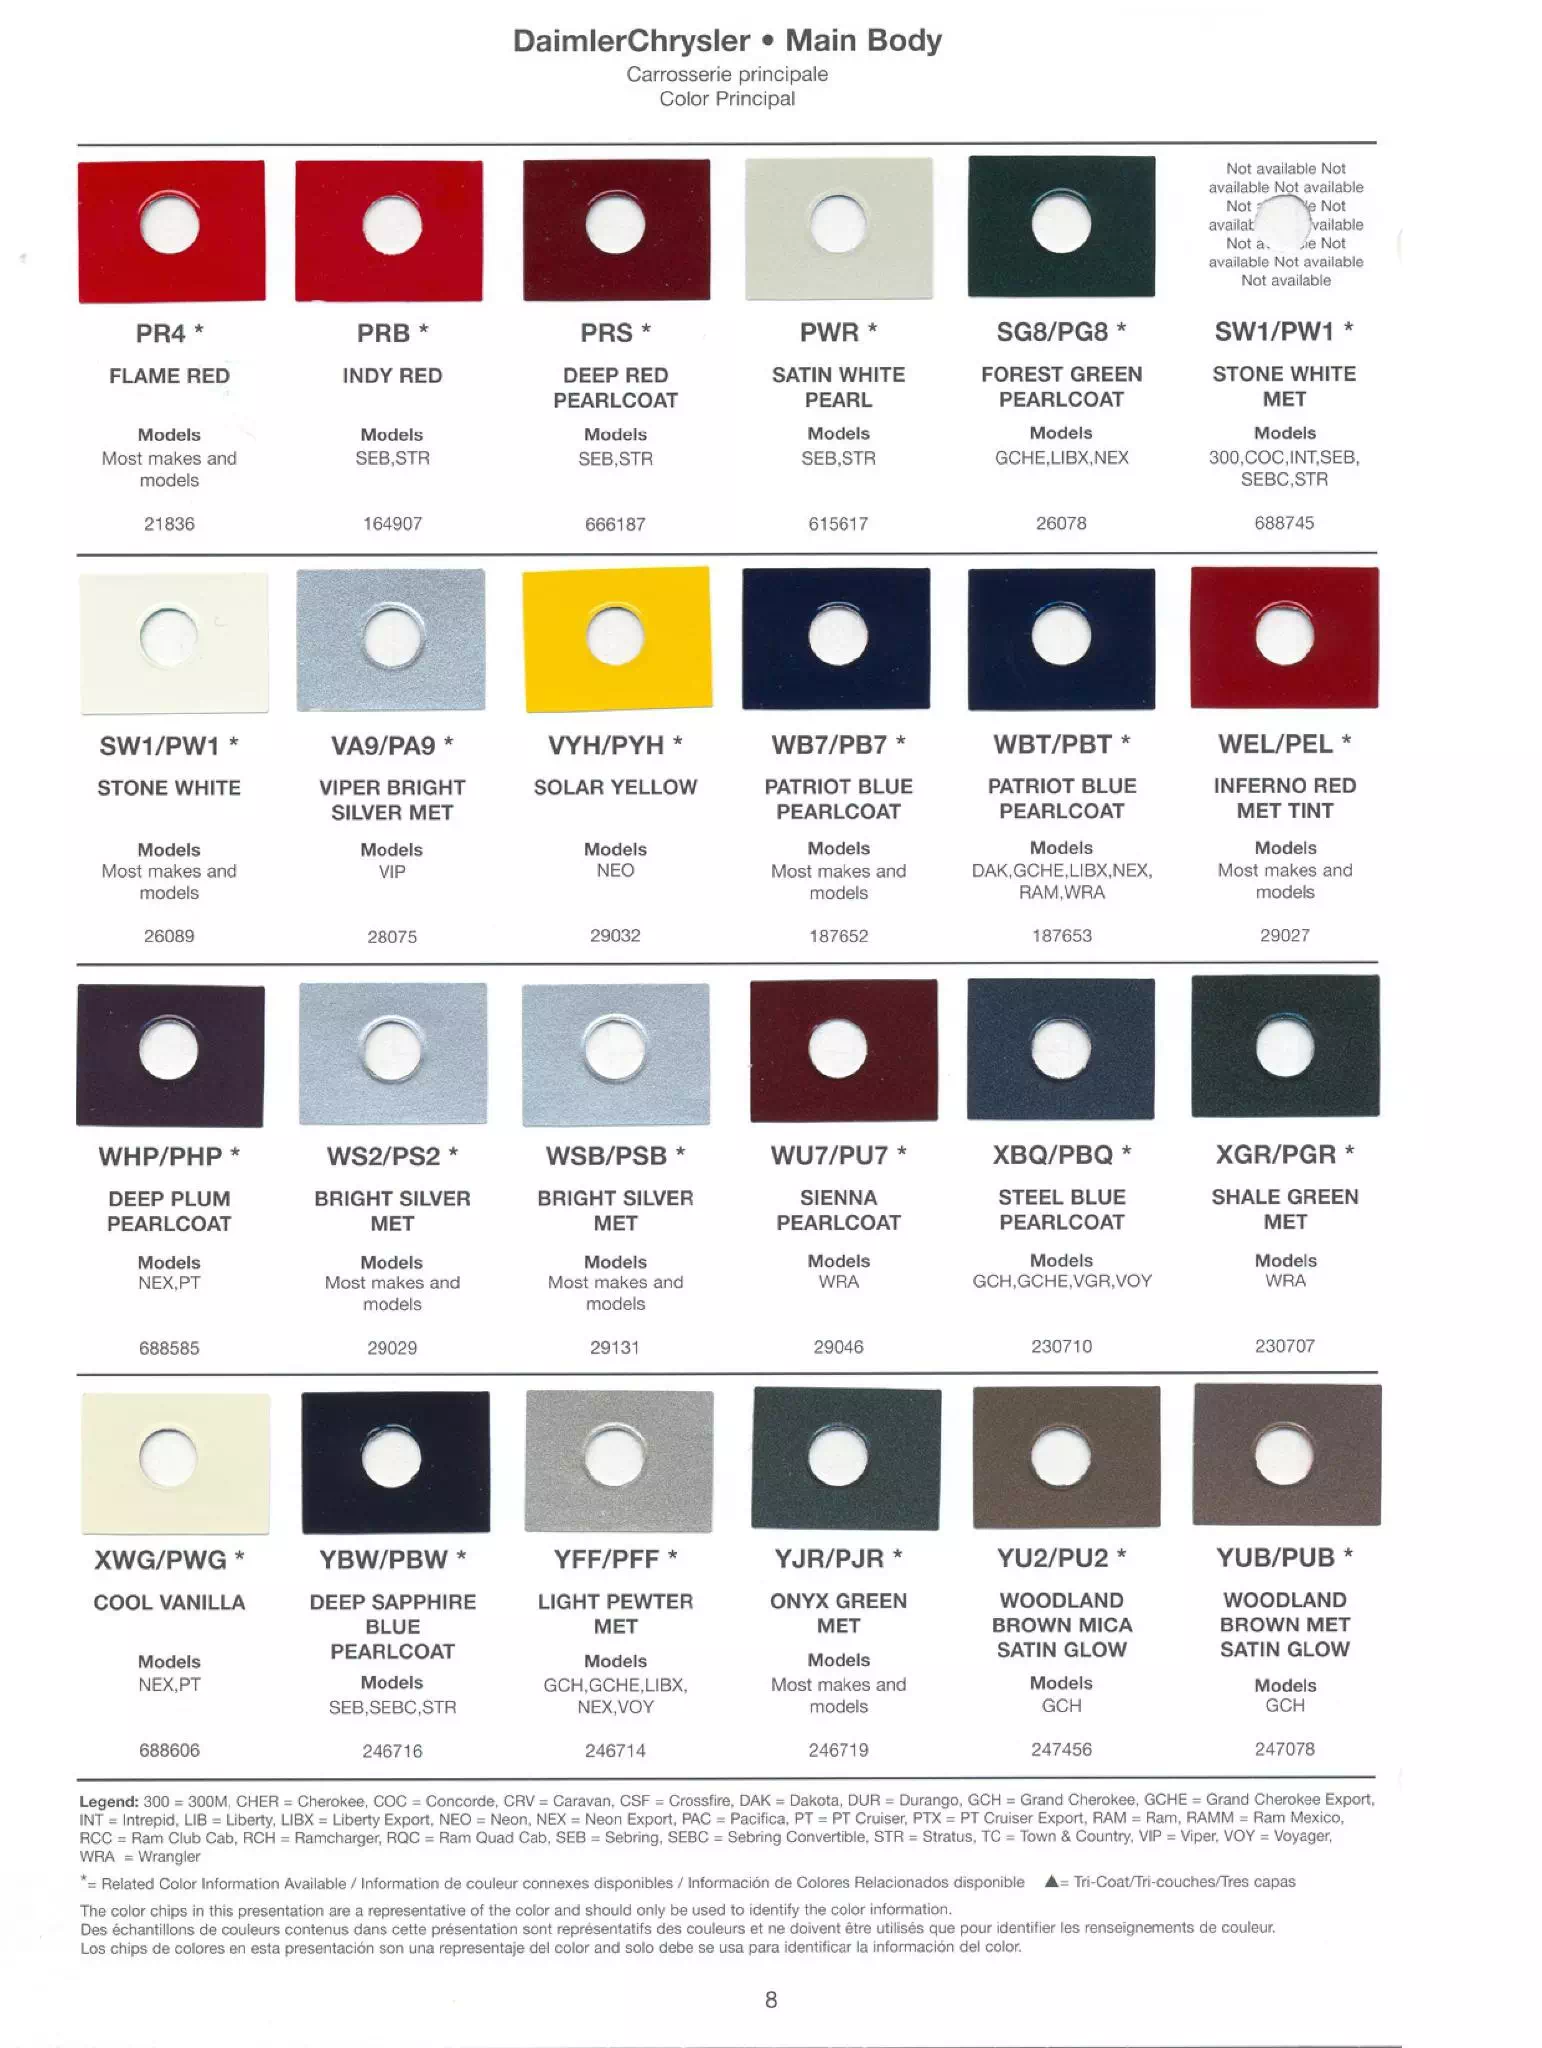 Exterior, Wheel, and Interior colors used on Dodge, Jeep, and Chrysler in 2004